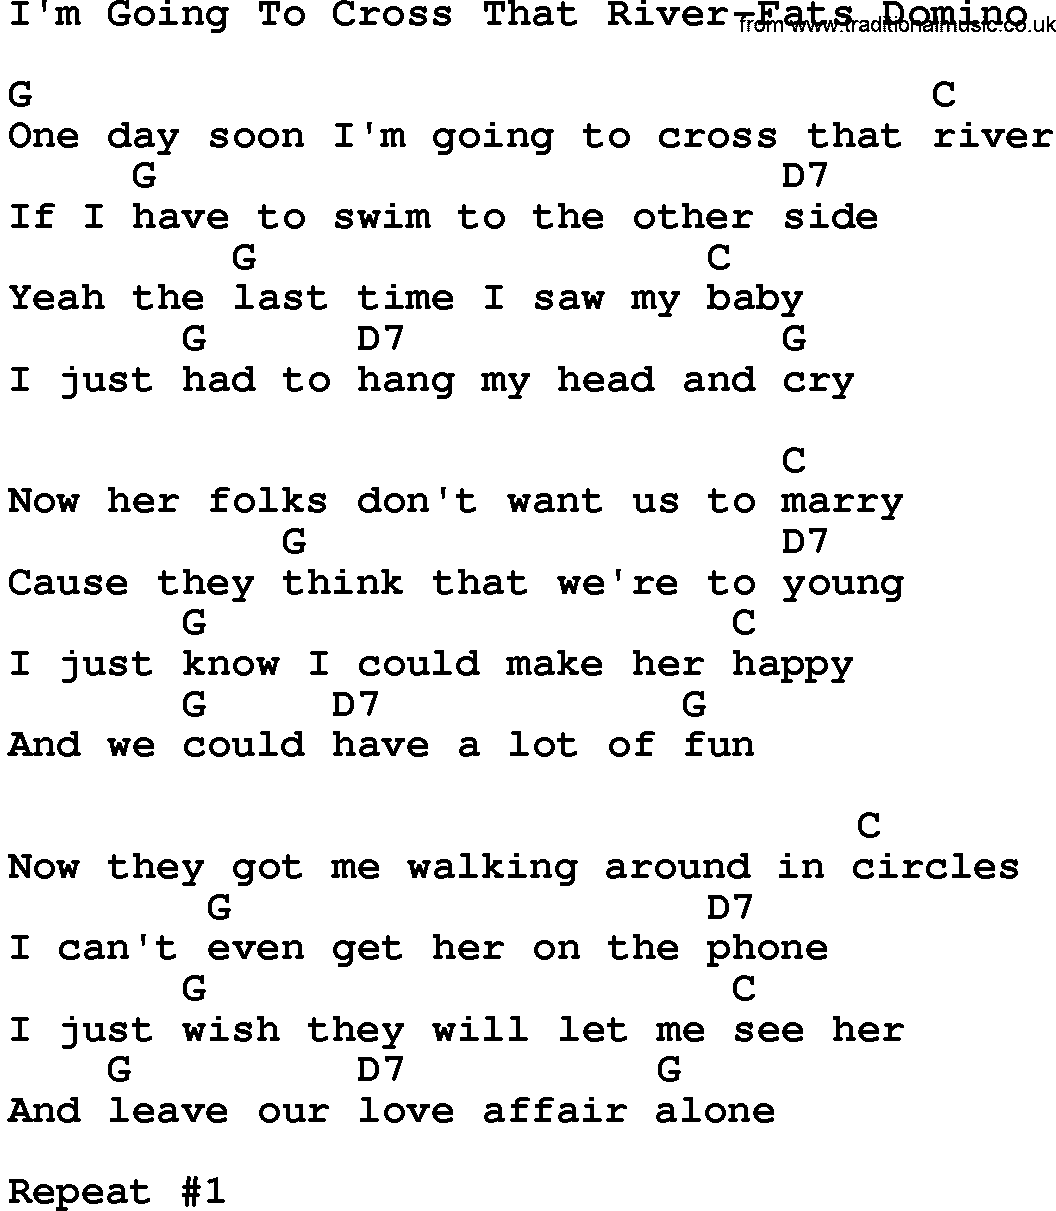 Country music song: I'm Going To Cross That River-Fats Domino lyrics and chords